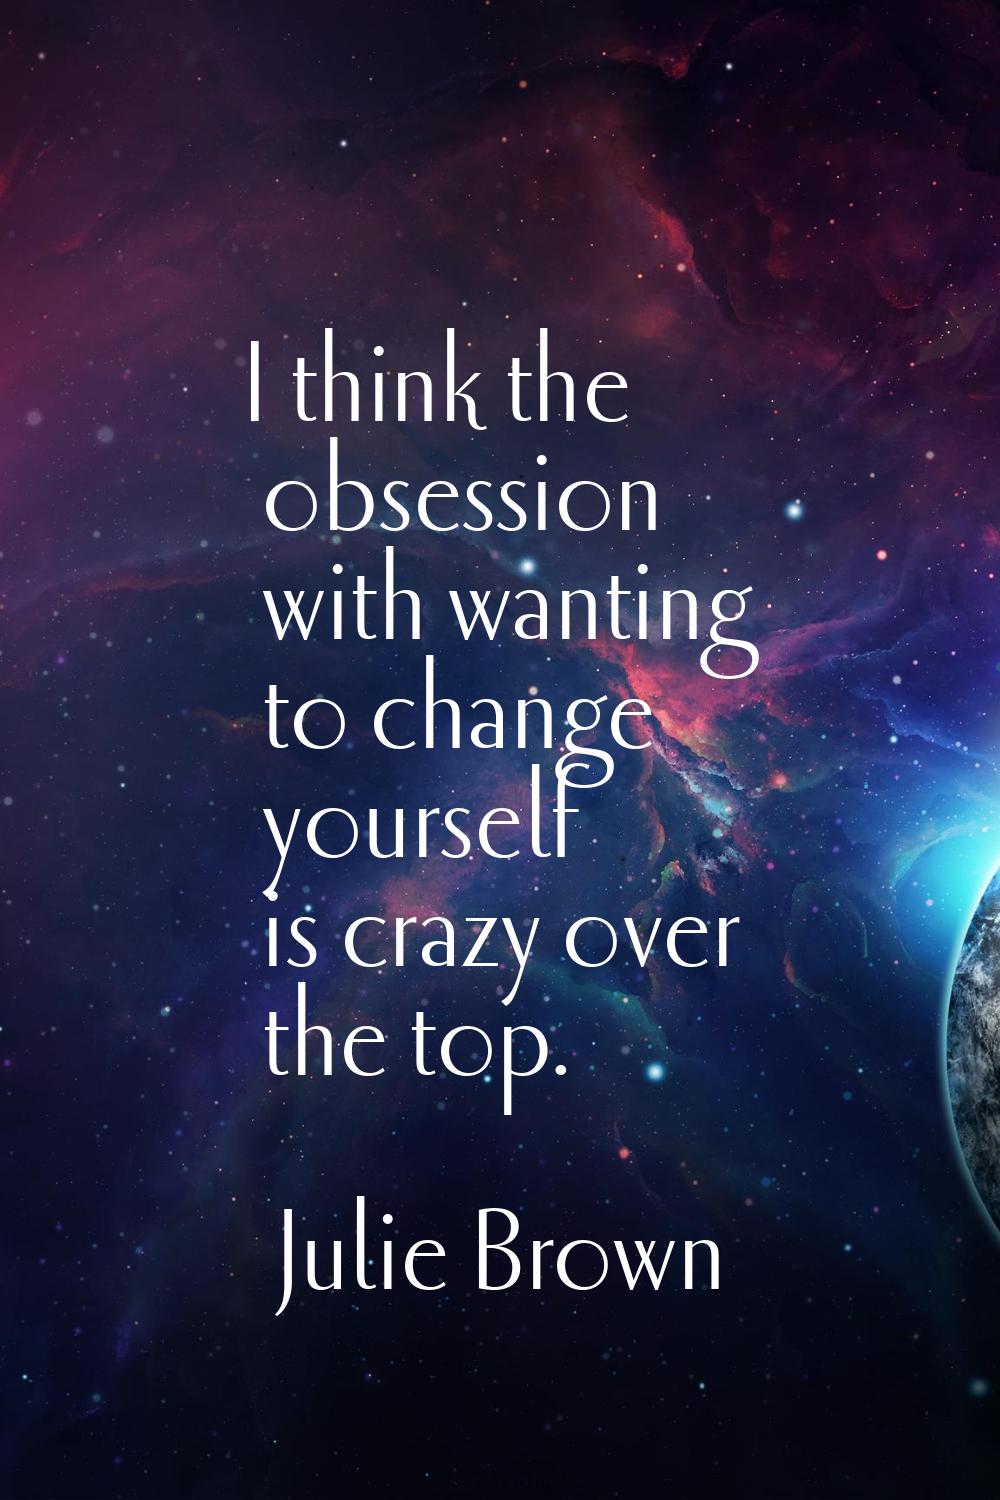 I think the obsession with wanting to change yourself is crazy over the top.